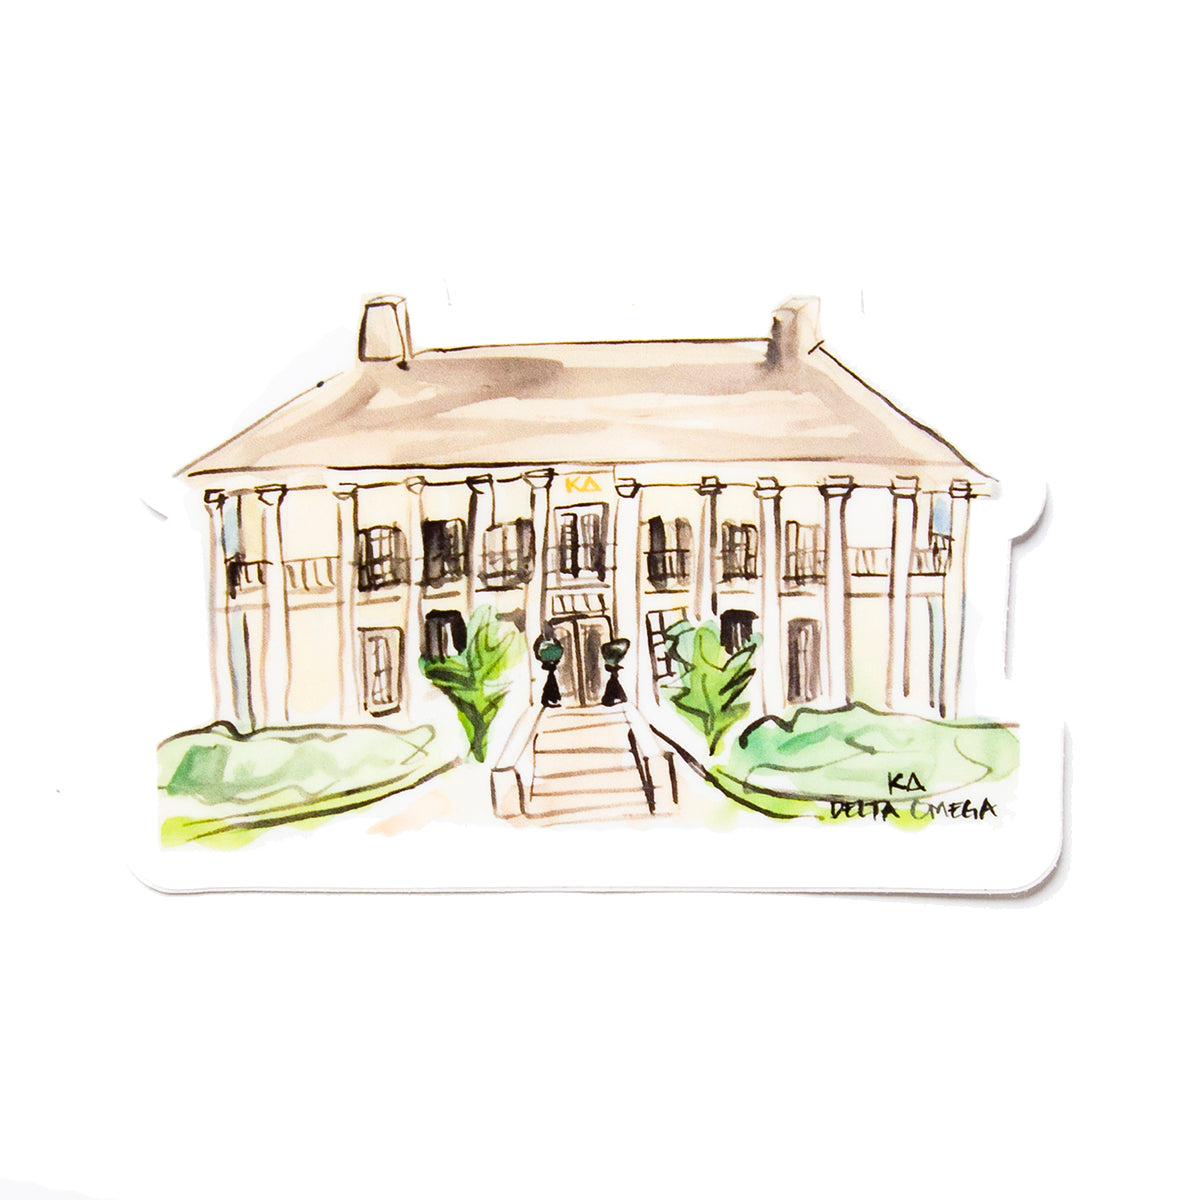 Mississippi State University House Decals